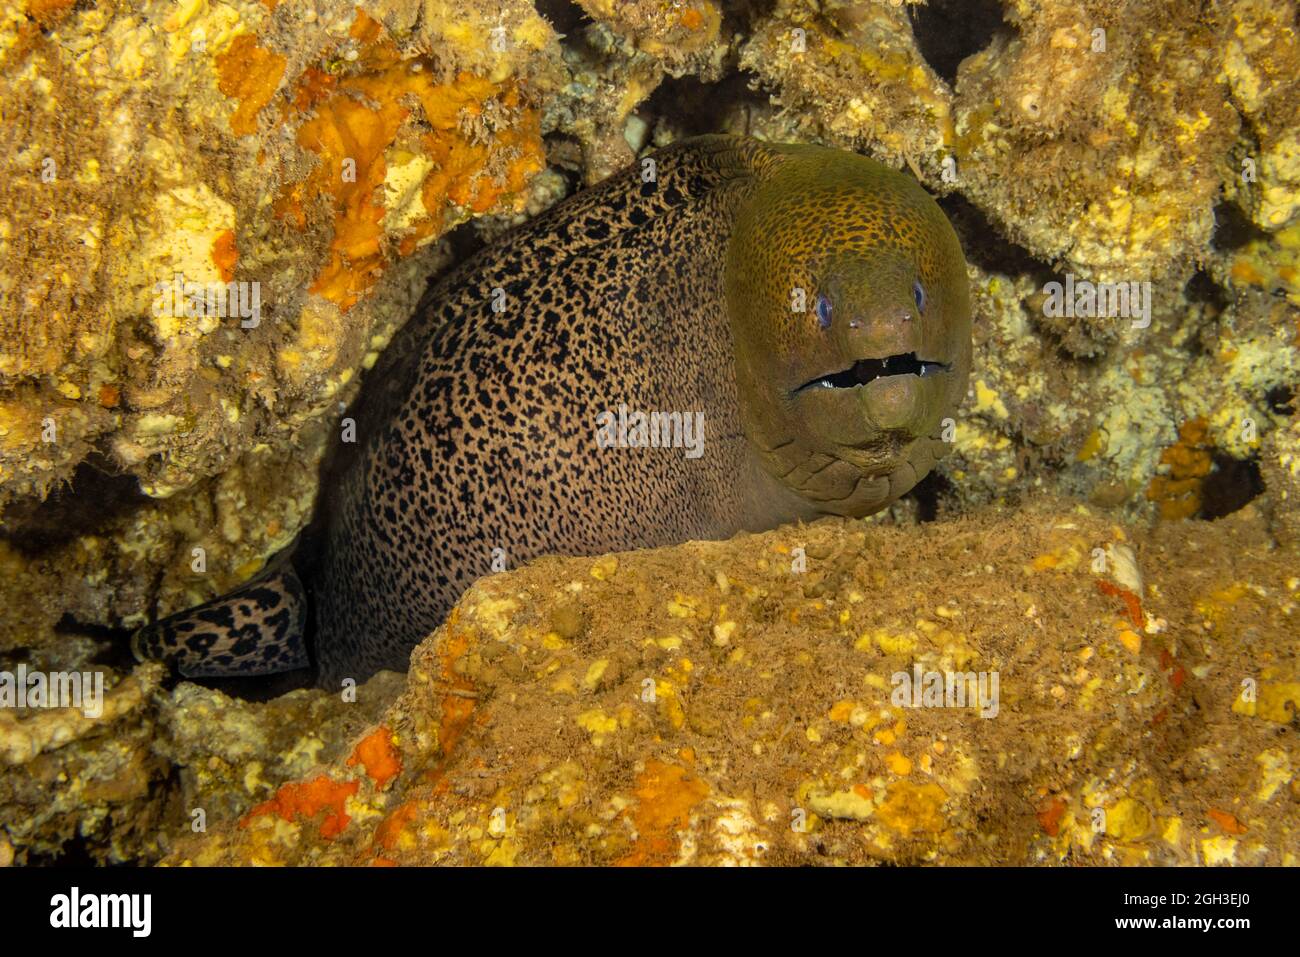 The giant moray eel, Gymnothorax javanicus, can be found around the world in tropical waters, but is very rare in Hawaii. Stock Photo